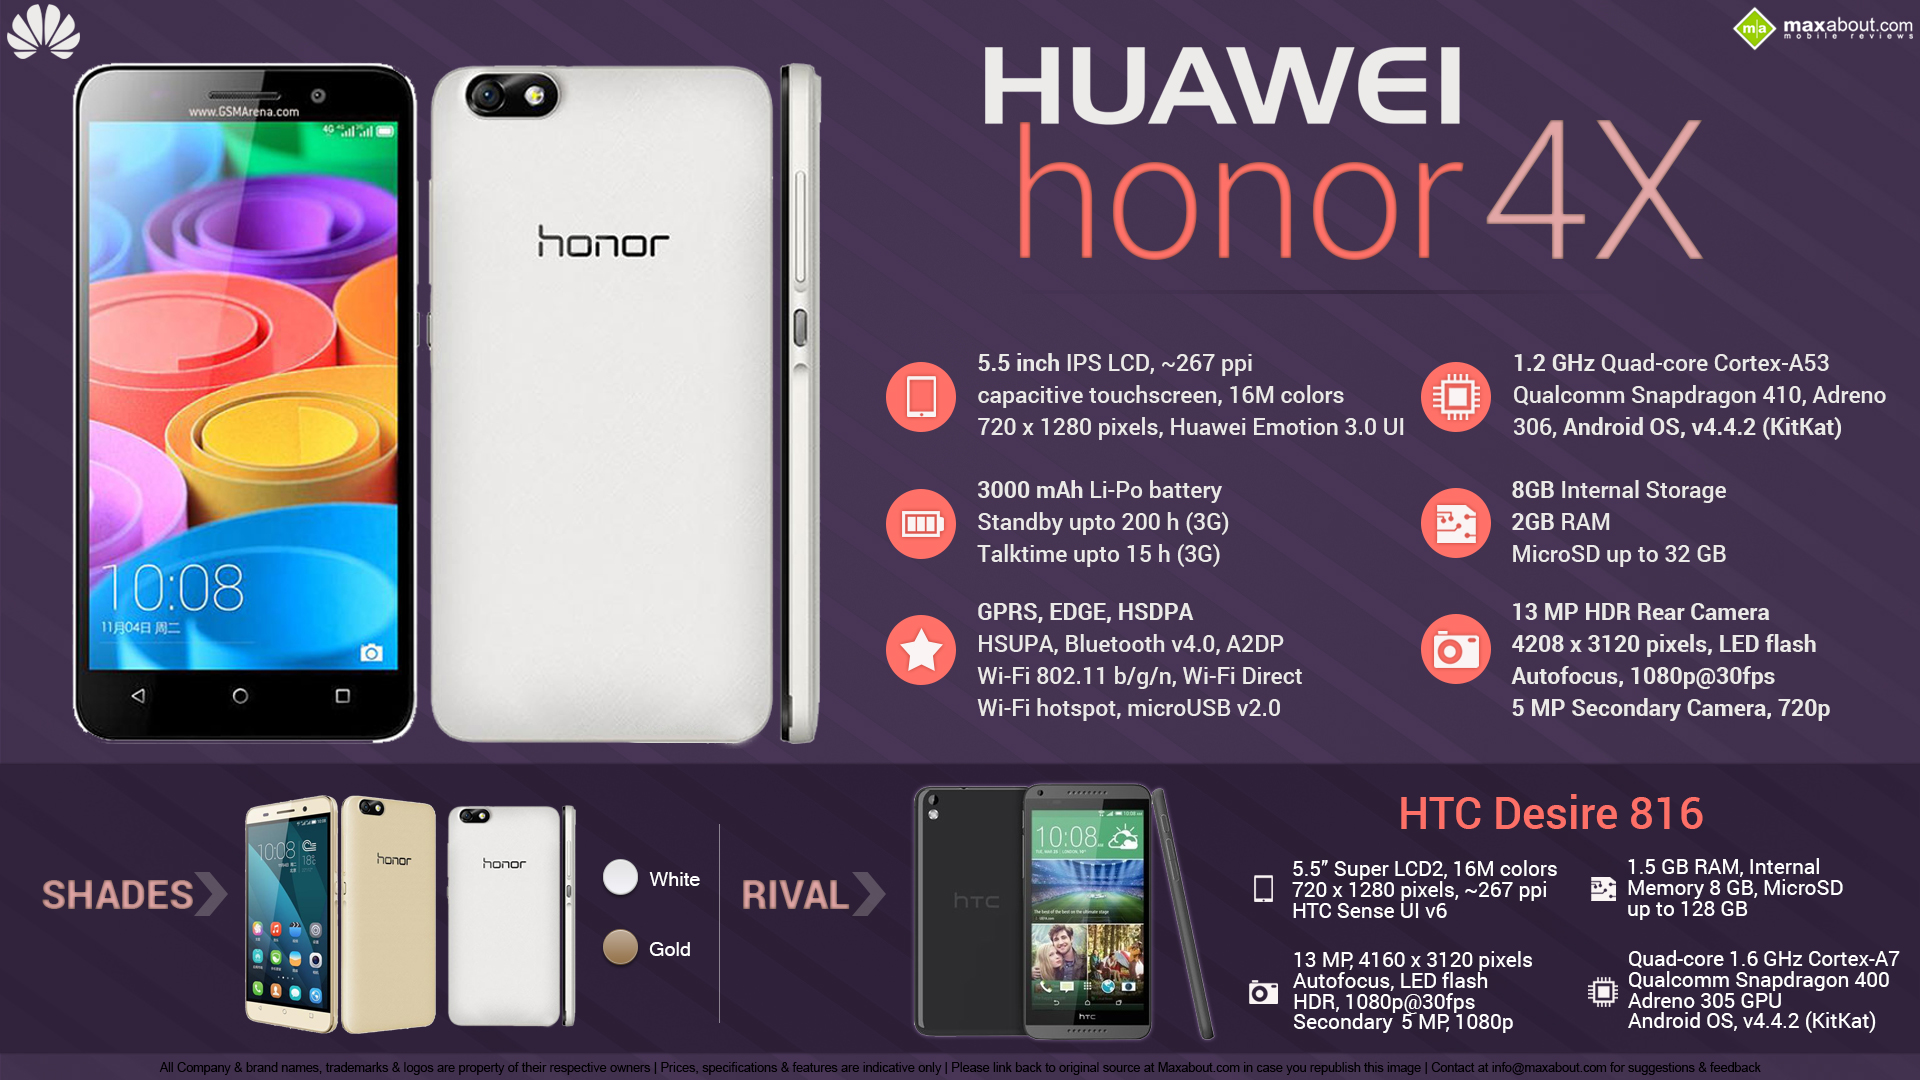 Quick Facts - Huawei Honor 4X